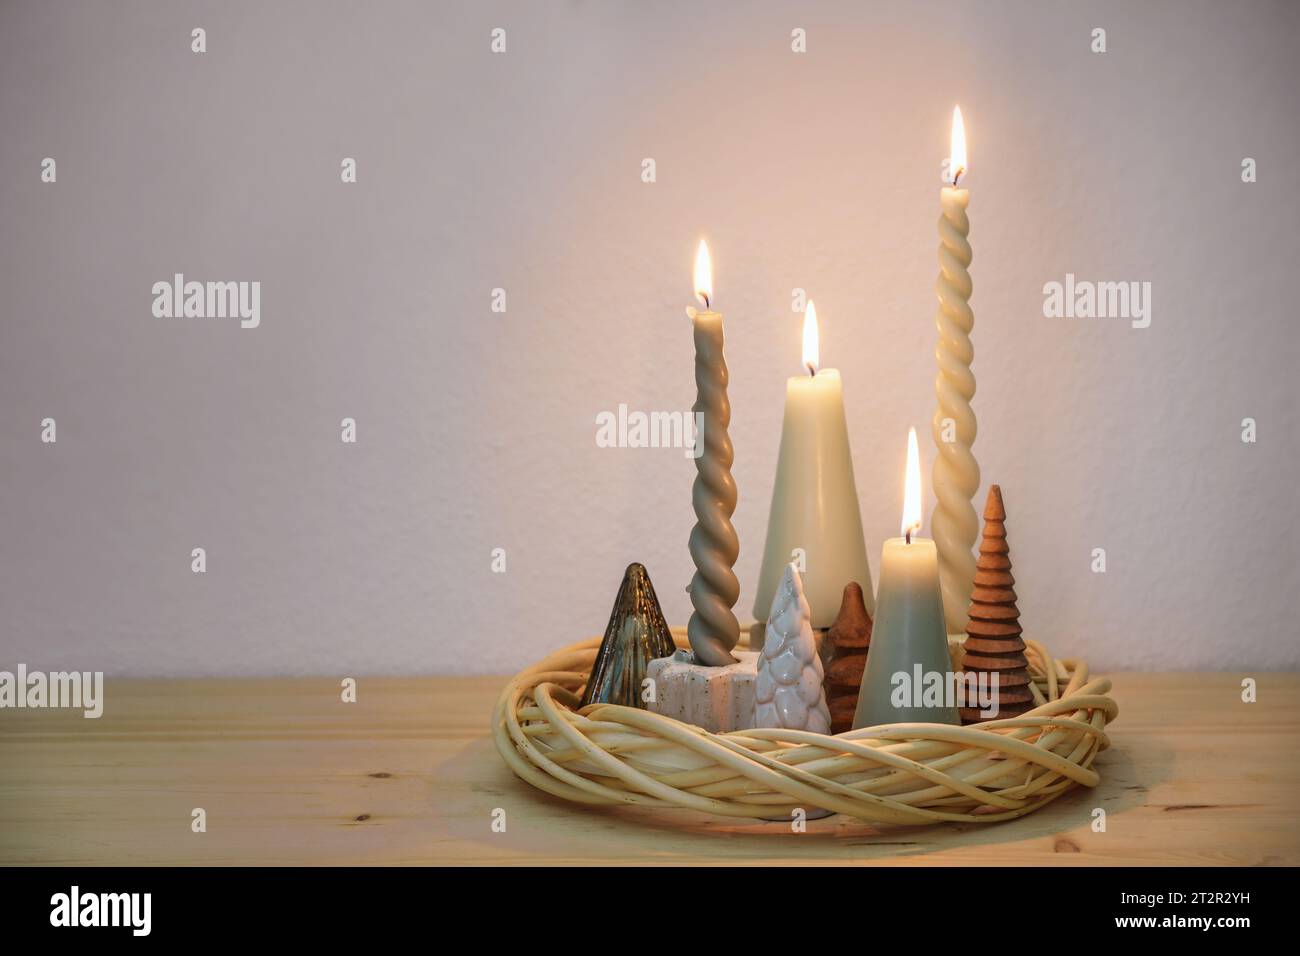 Simple advent decoration in natural colors with different candles and small artificial Christmas trees arranged in a wreath from wickerwork on a woode Stock Photo